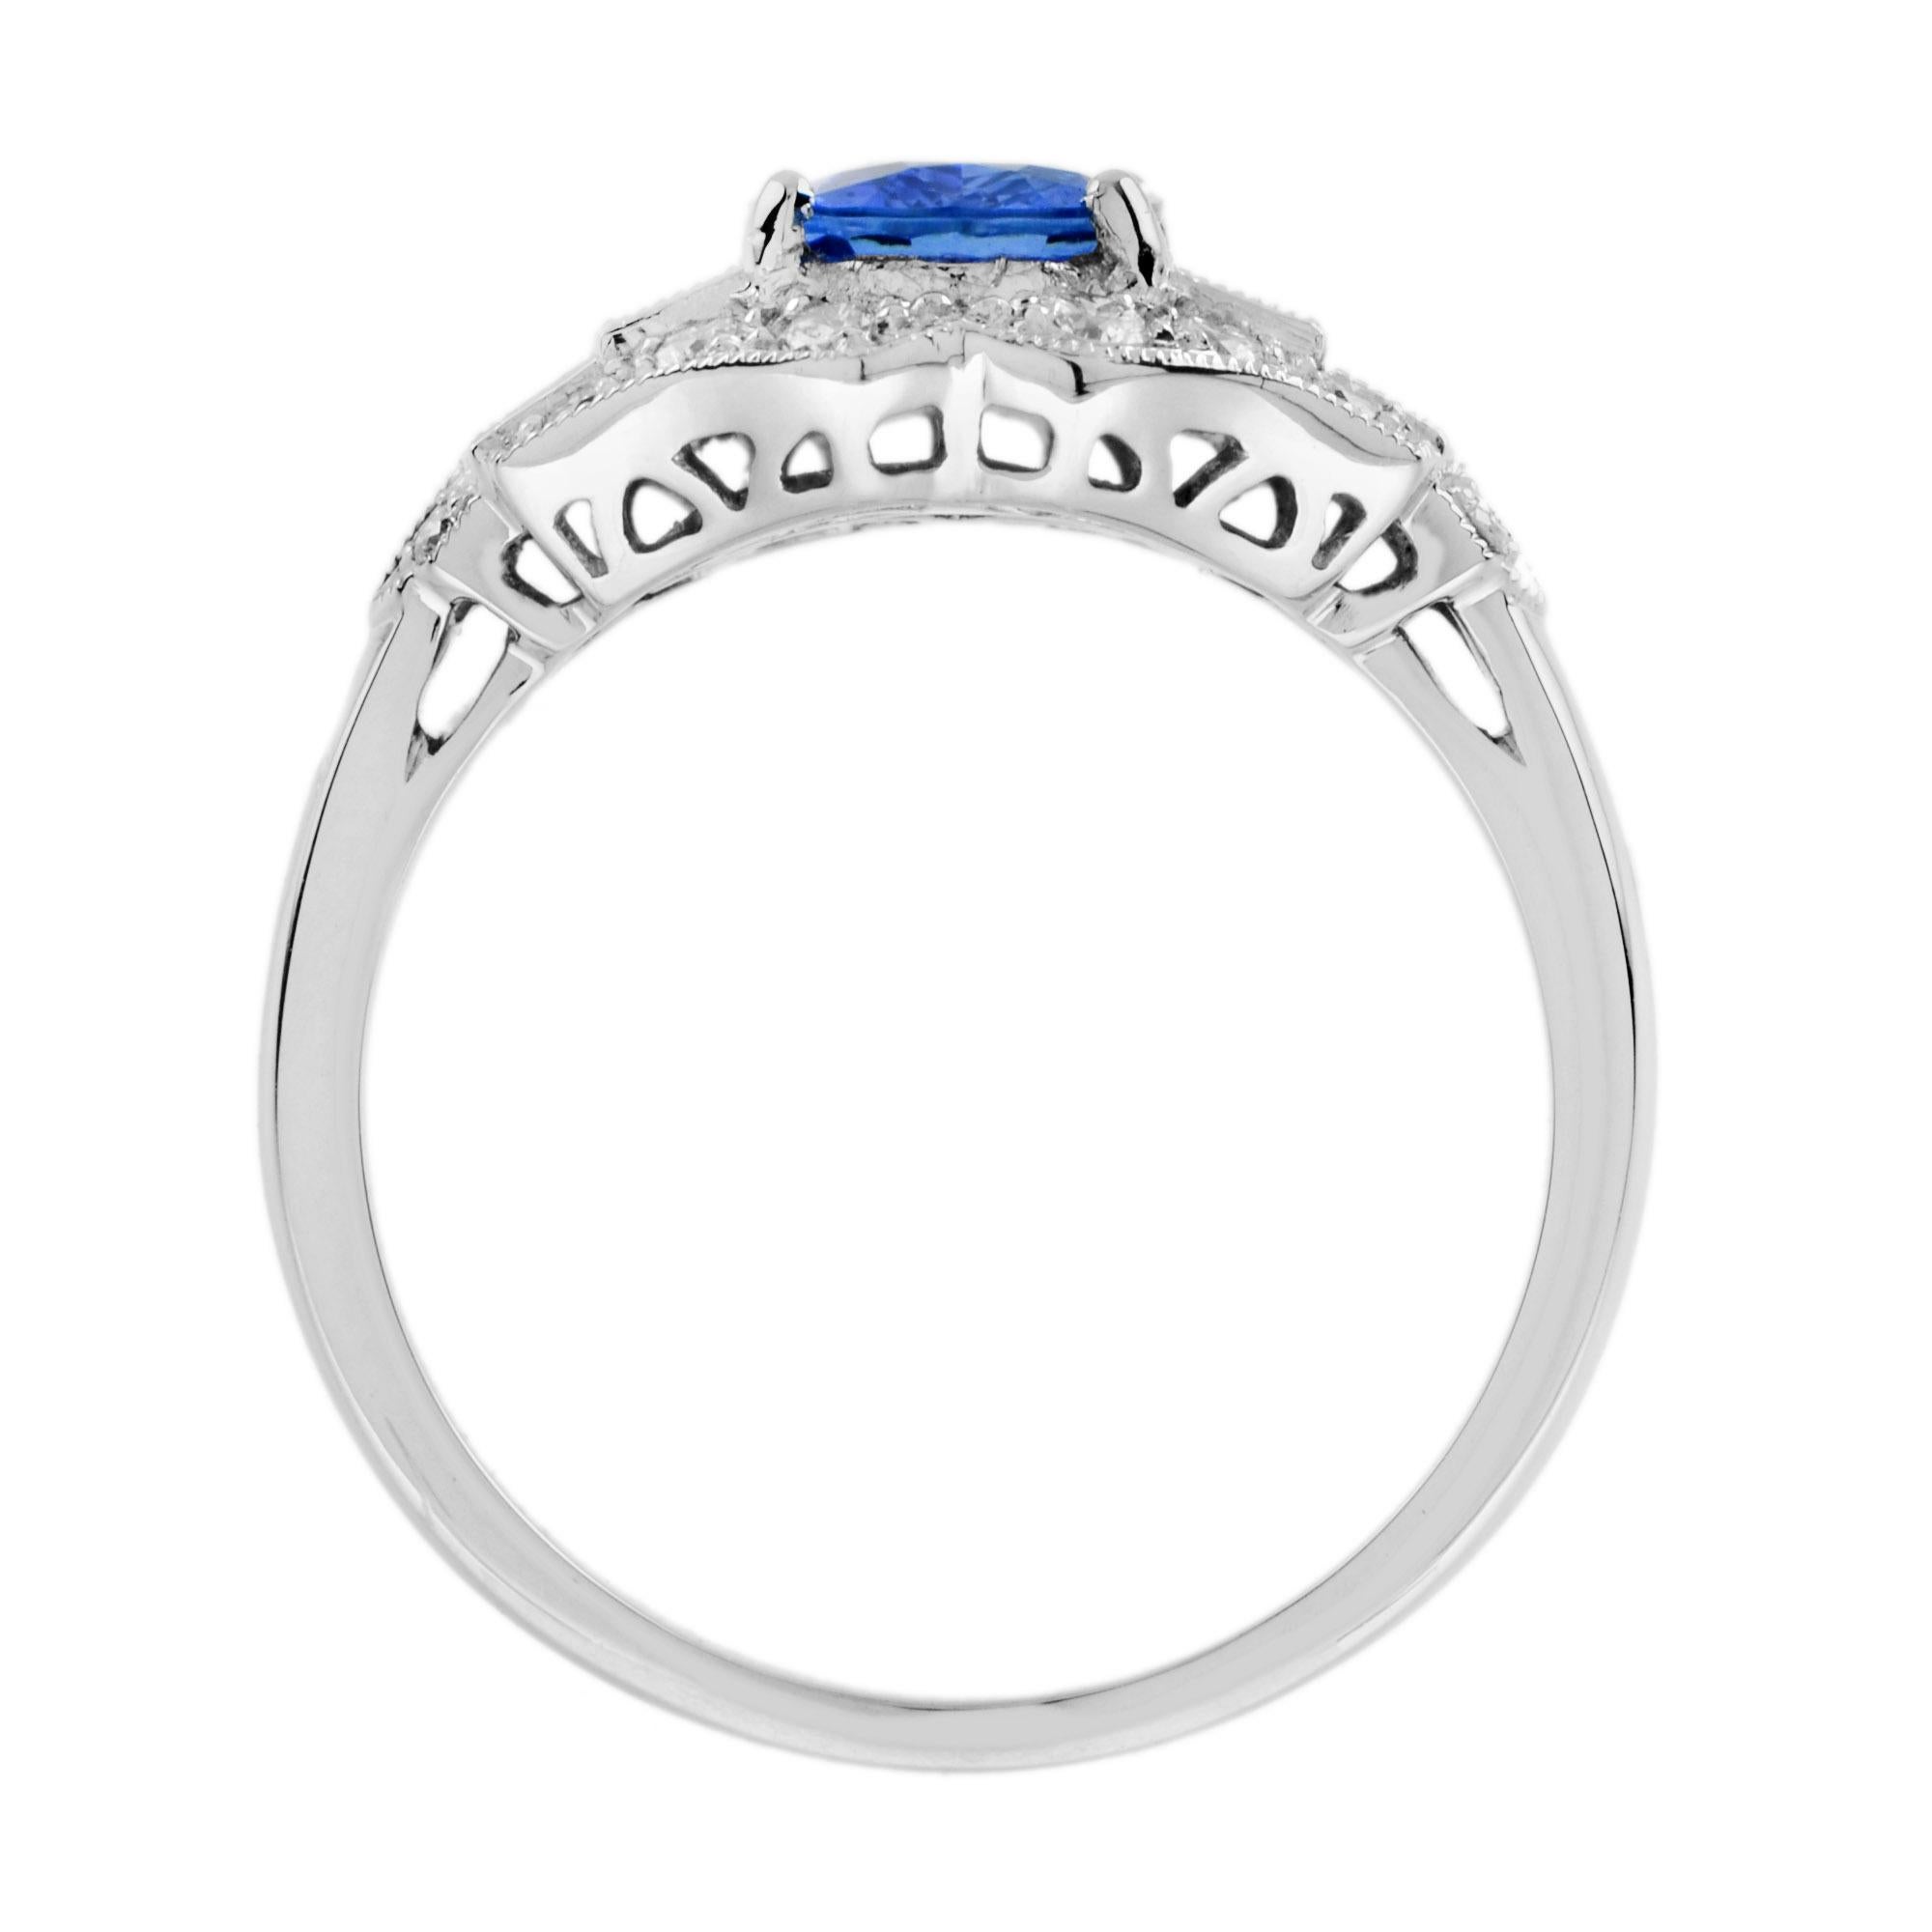 Ceylon Sapphire and Diamond Art Deco Style Engagement Ring in 18k White Gold 3